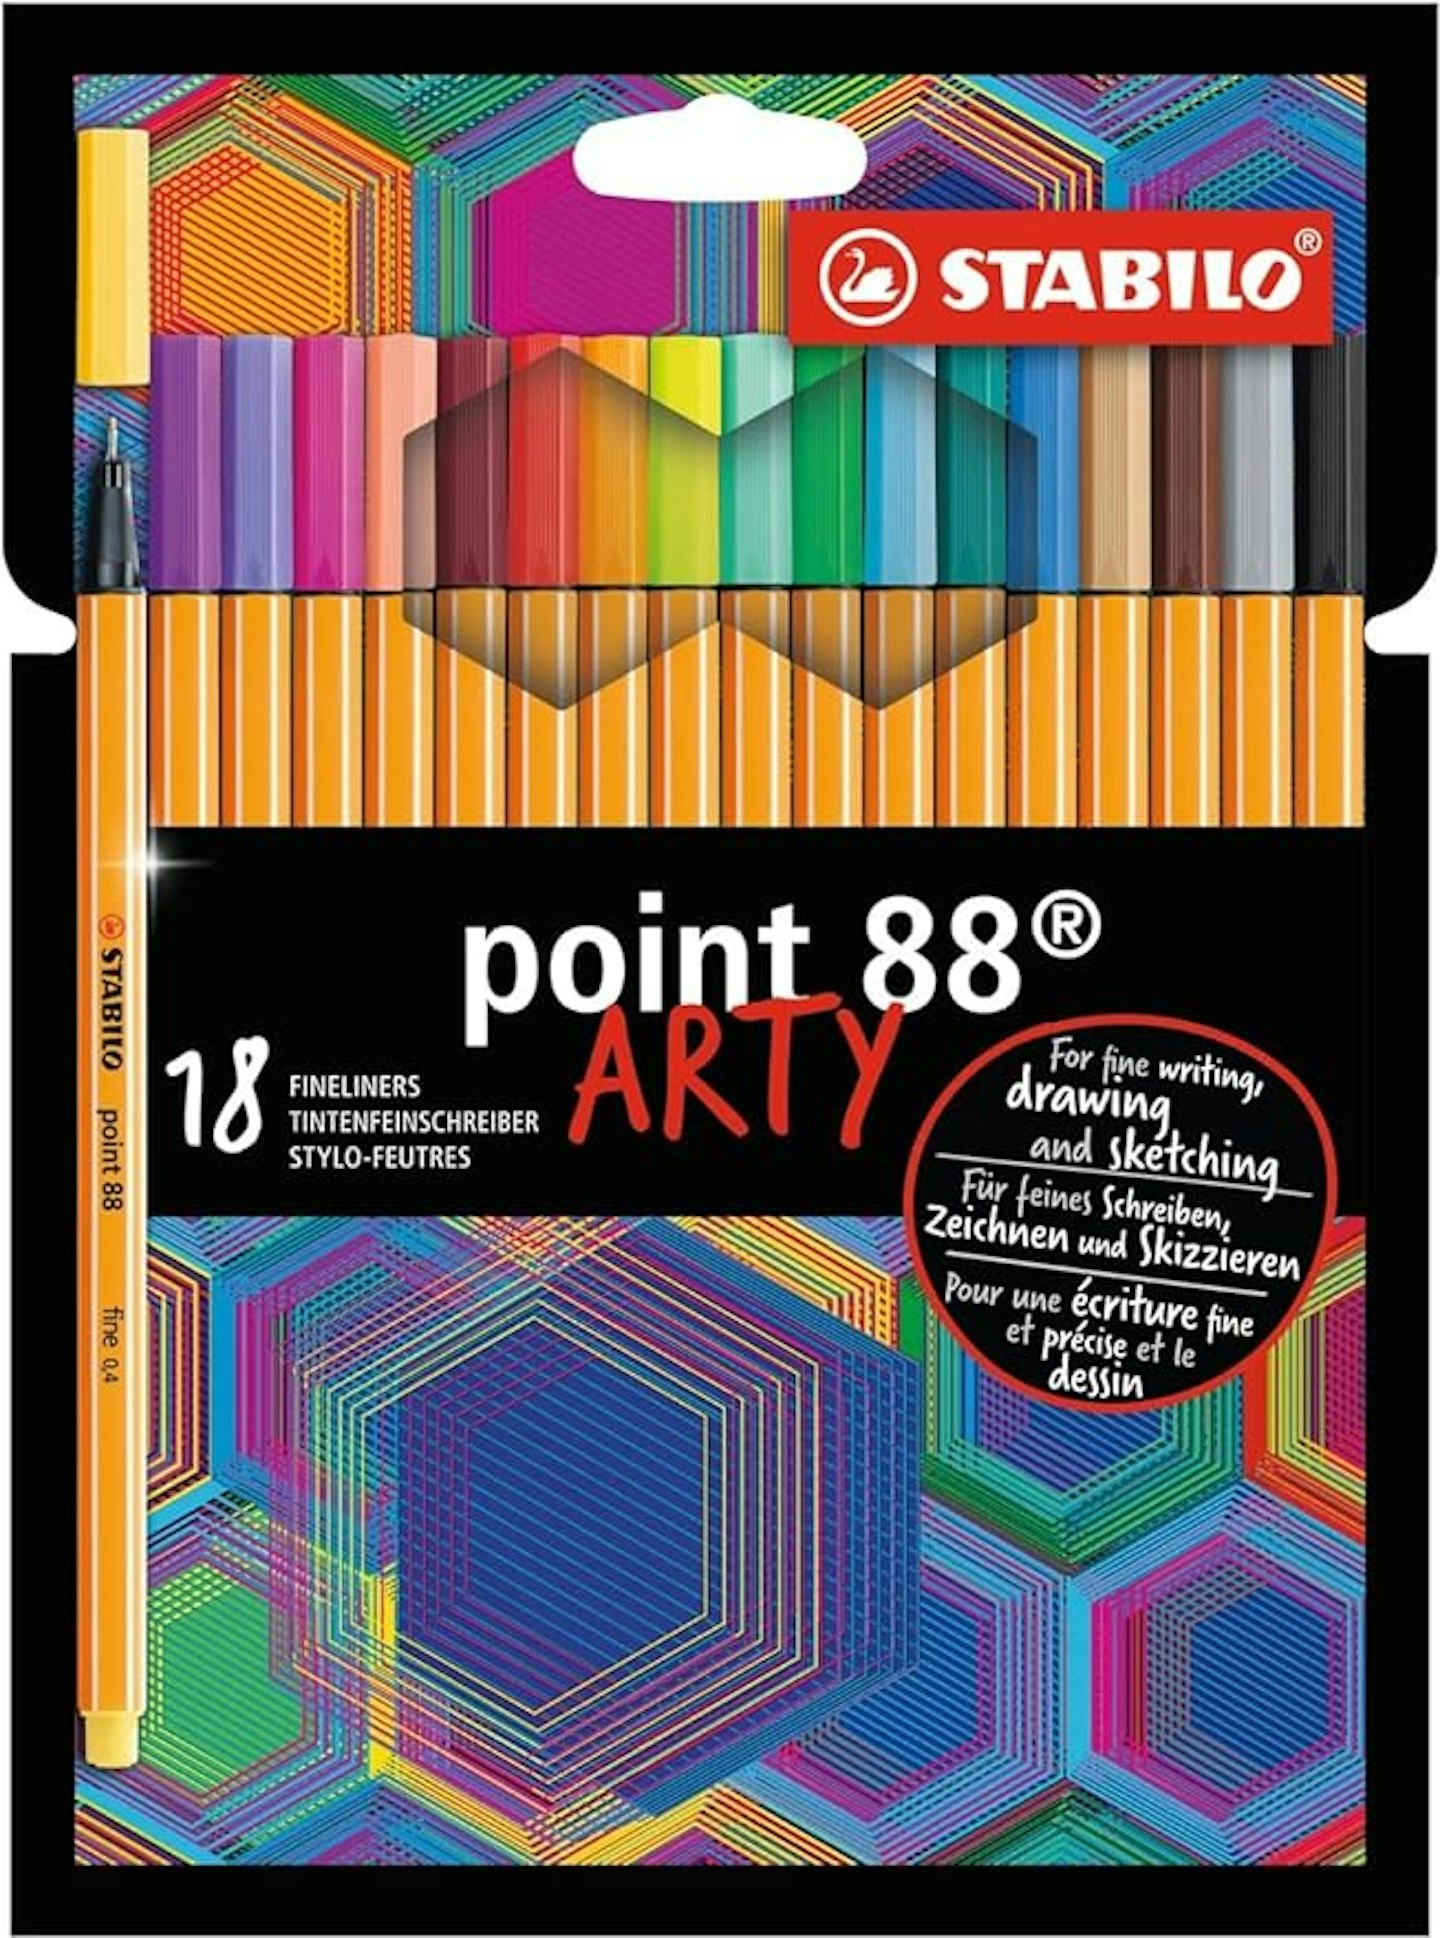 Fineliner - STABILO point 88 - ARTY - Tin of 66